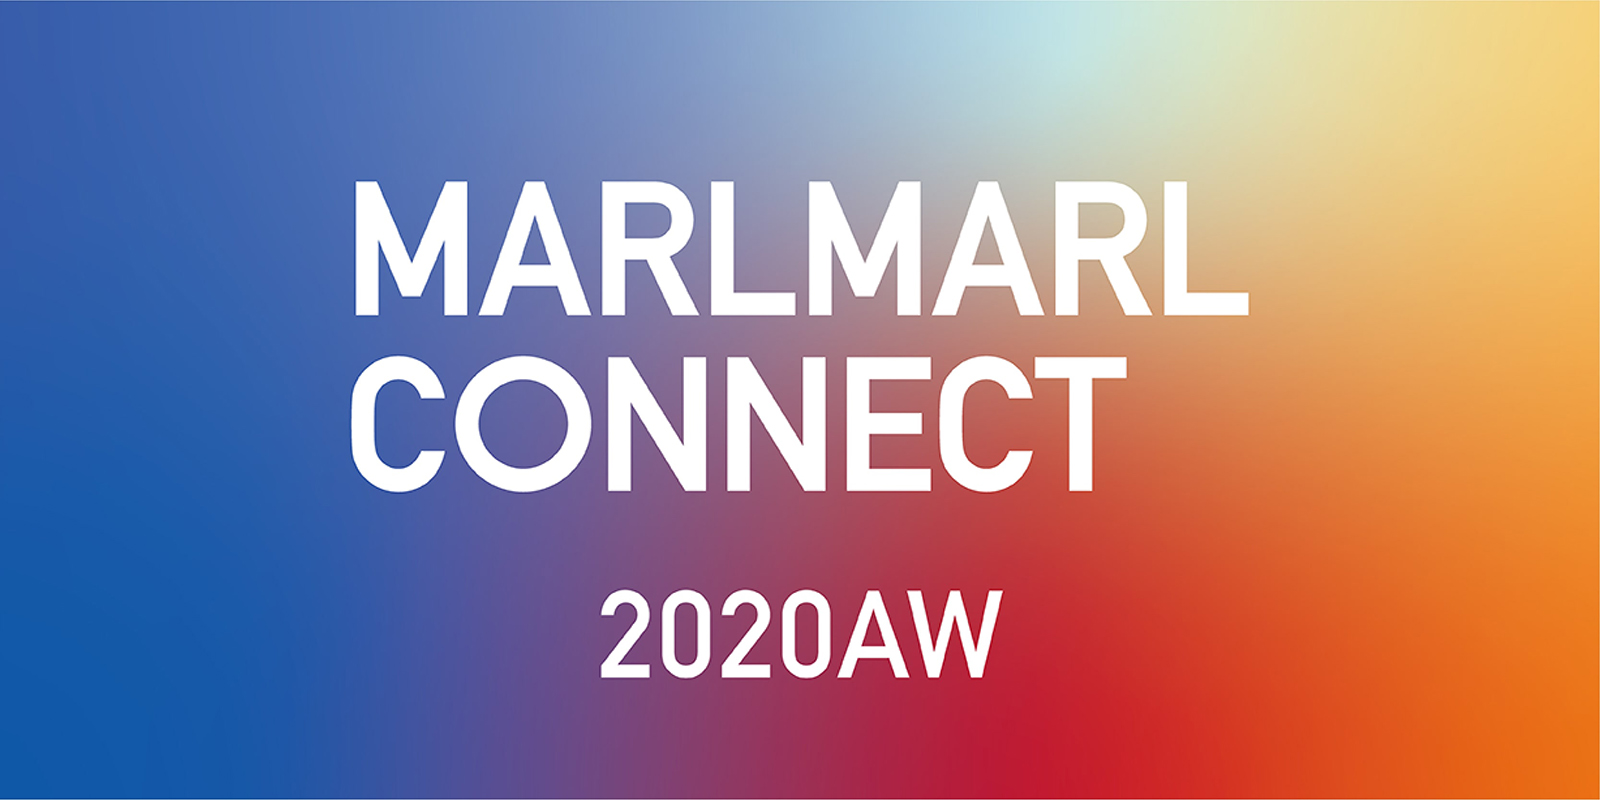 MARLMARL CONNECT 2020AW みんなでつくる歌 We LIVE together -共生- キャンペーン